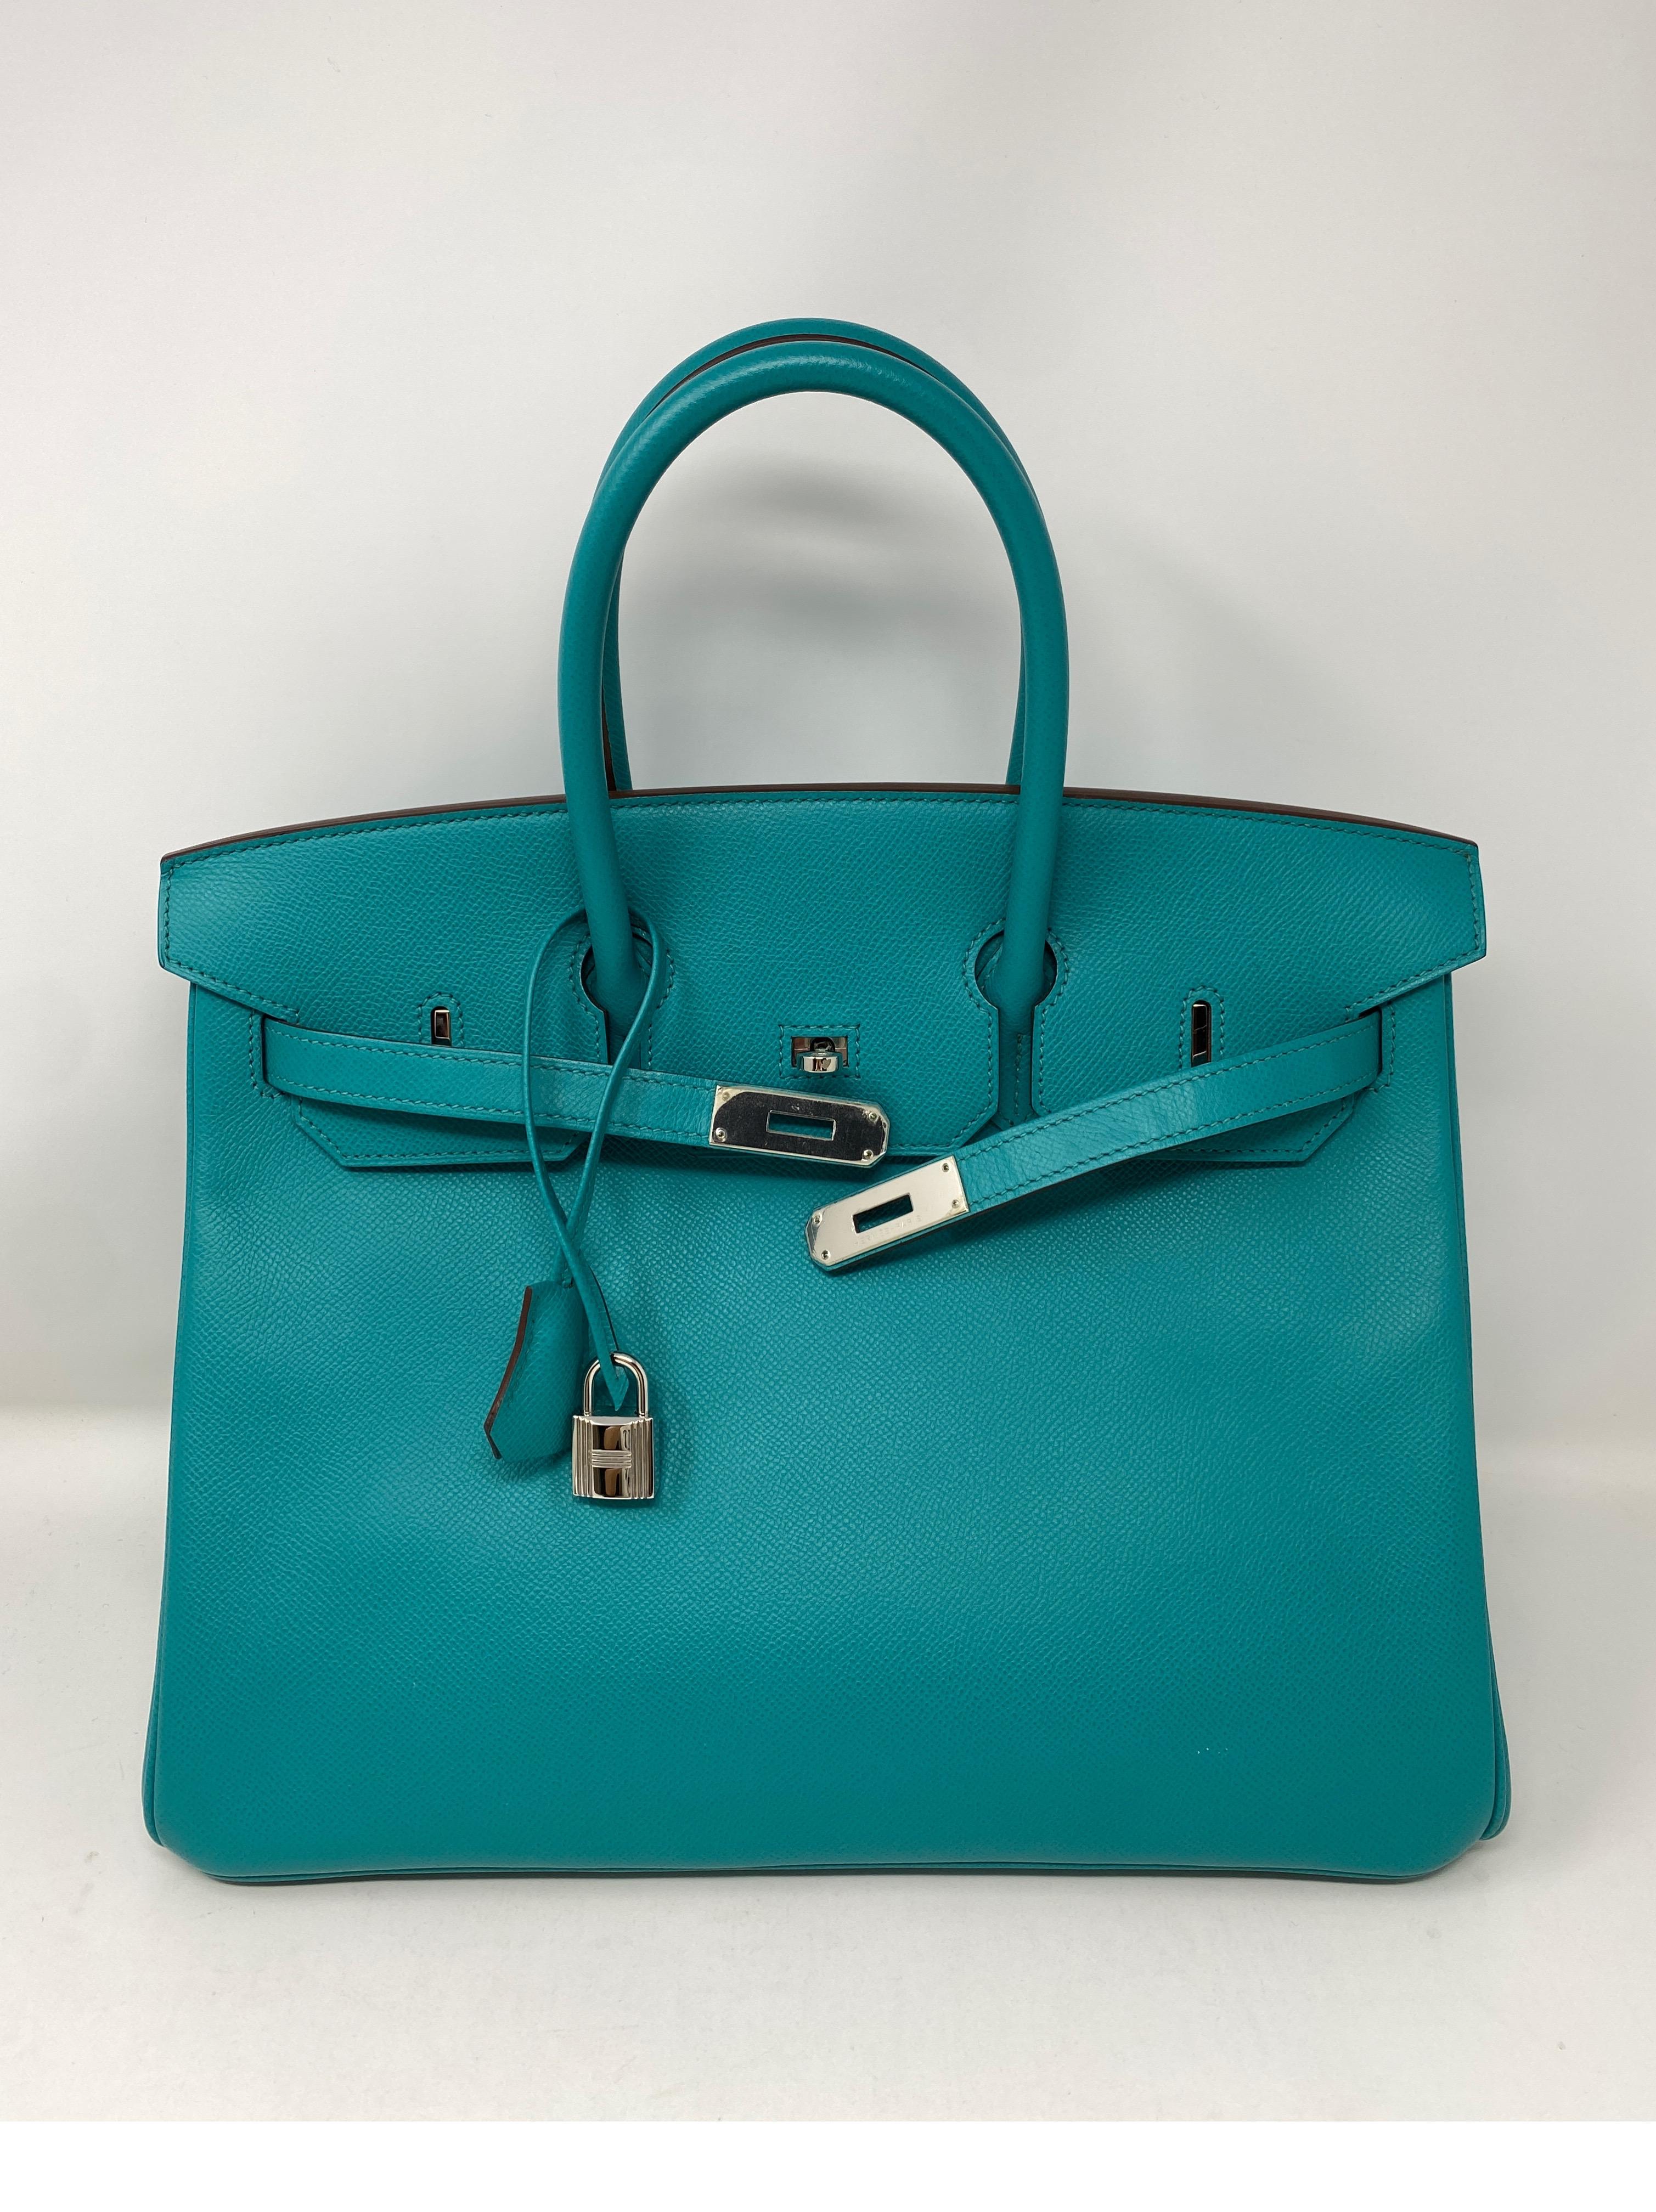 Hermes Bleu Paon Birkin 35 Bag. Palladium hardware. Epsom leather. Gorgeous color. P square. From 2012. Excellent like new condition. Plastic still on hardware. Rare color. Includes clochette, lock, keys and dust cover. Guaranteed authentic. 